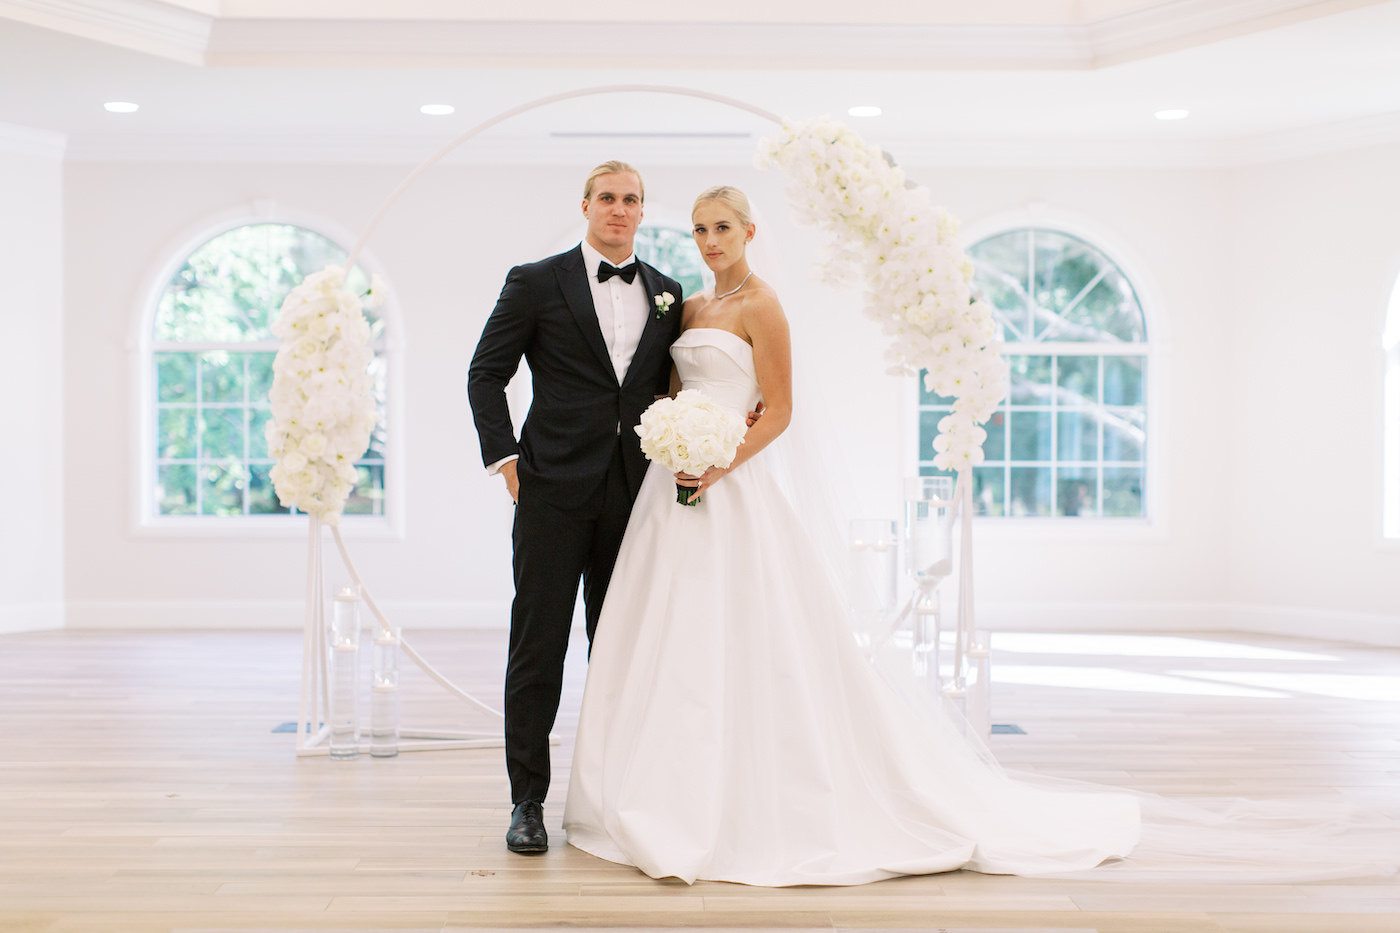 Classic Traditional Bride in Strapless Crepe Romona Keveza Ballgown Wedding Dress Holding White Floral Bouquet, Groom in Black Tuxedo Portrait in Front of Circular Arch with White Orchid Arrangements | Tampa Bay Wedding Planner Parties A'la Carte | Safety Harbor Church Wedding Venue Harborside Chapel